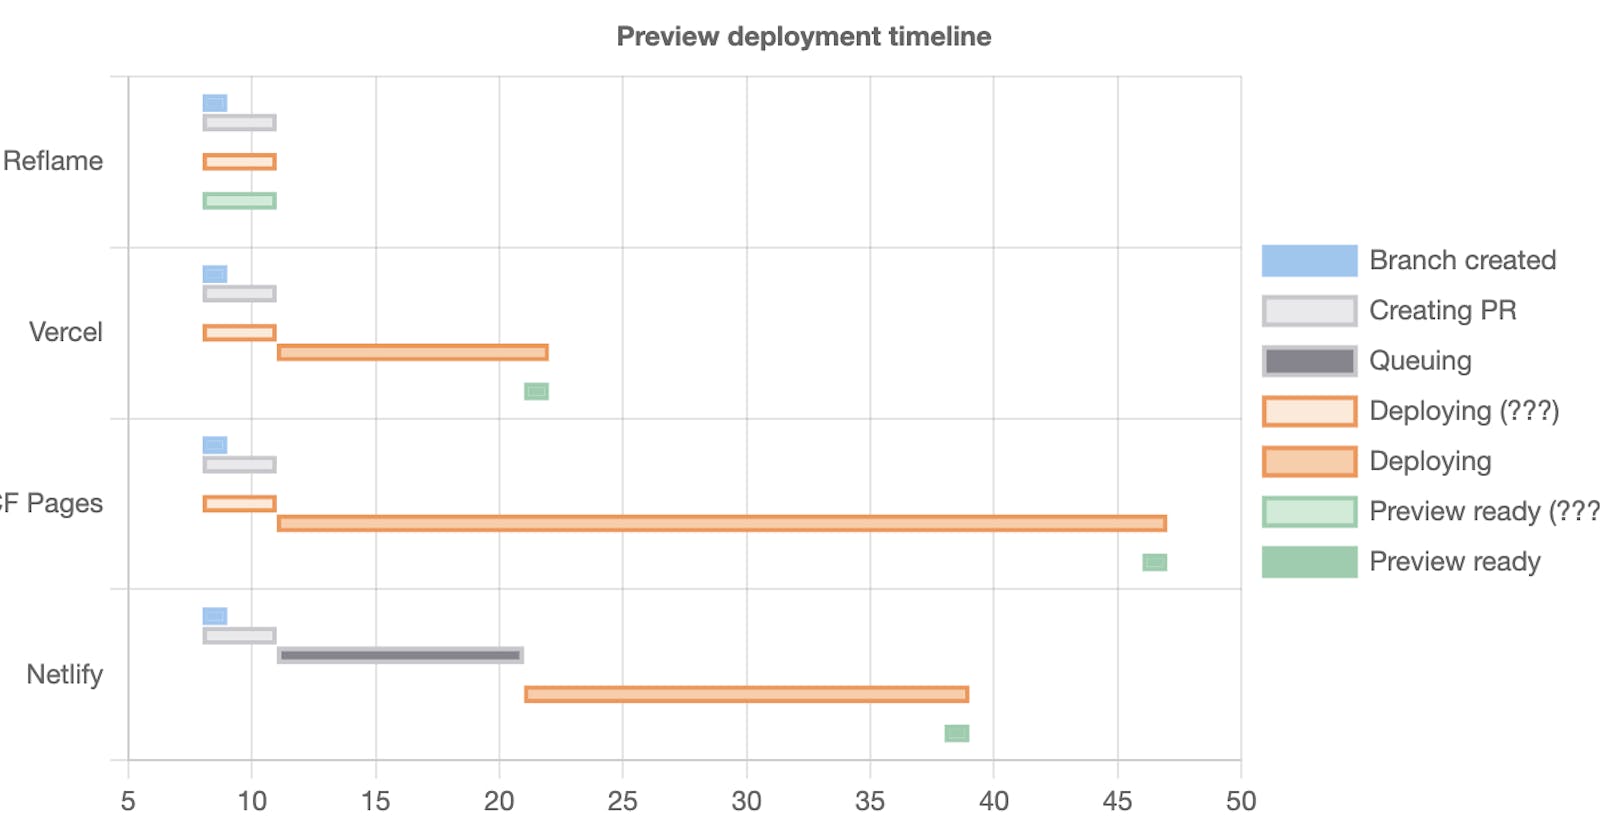 I compared deploy speeds for Reflame, Vercel, Netlify, Cloudflare Pages on the same repo